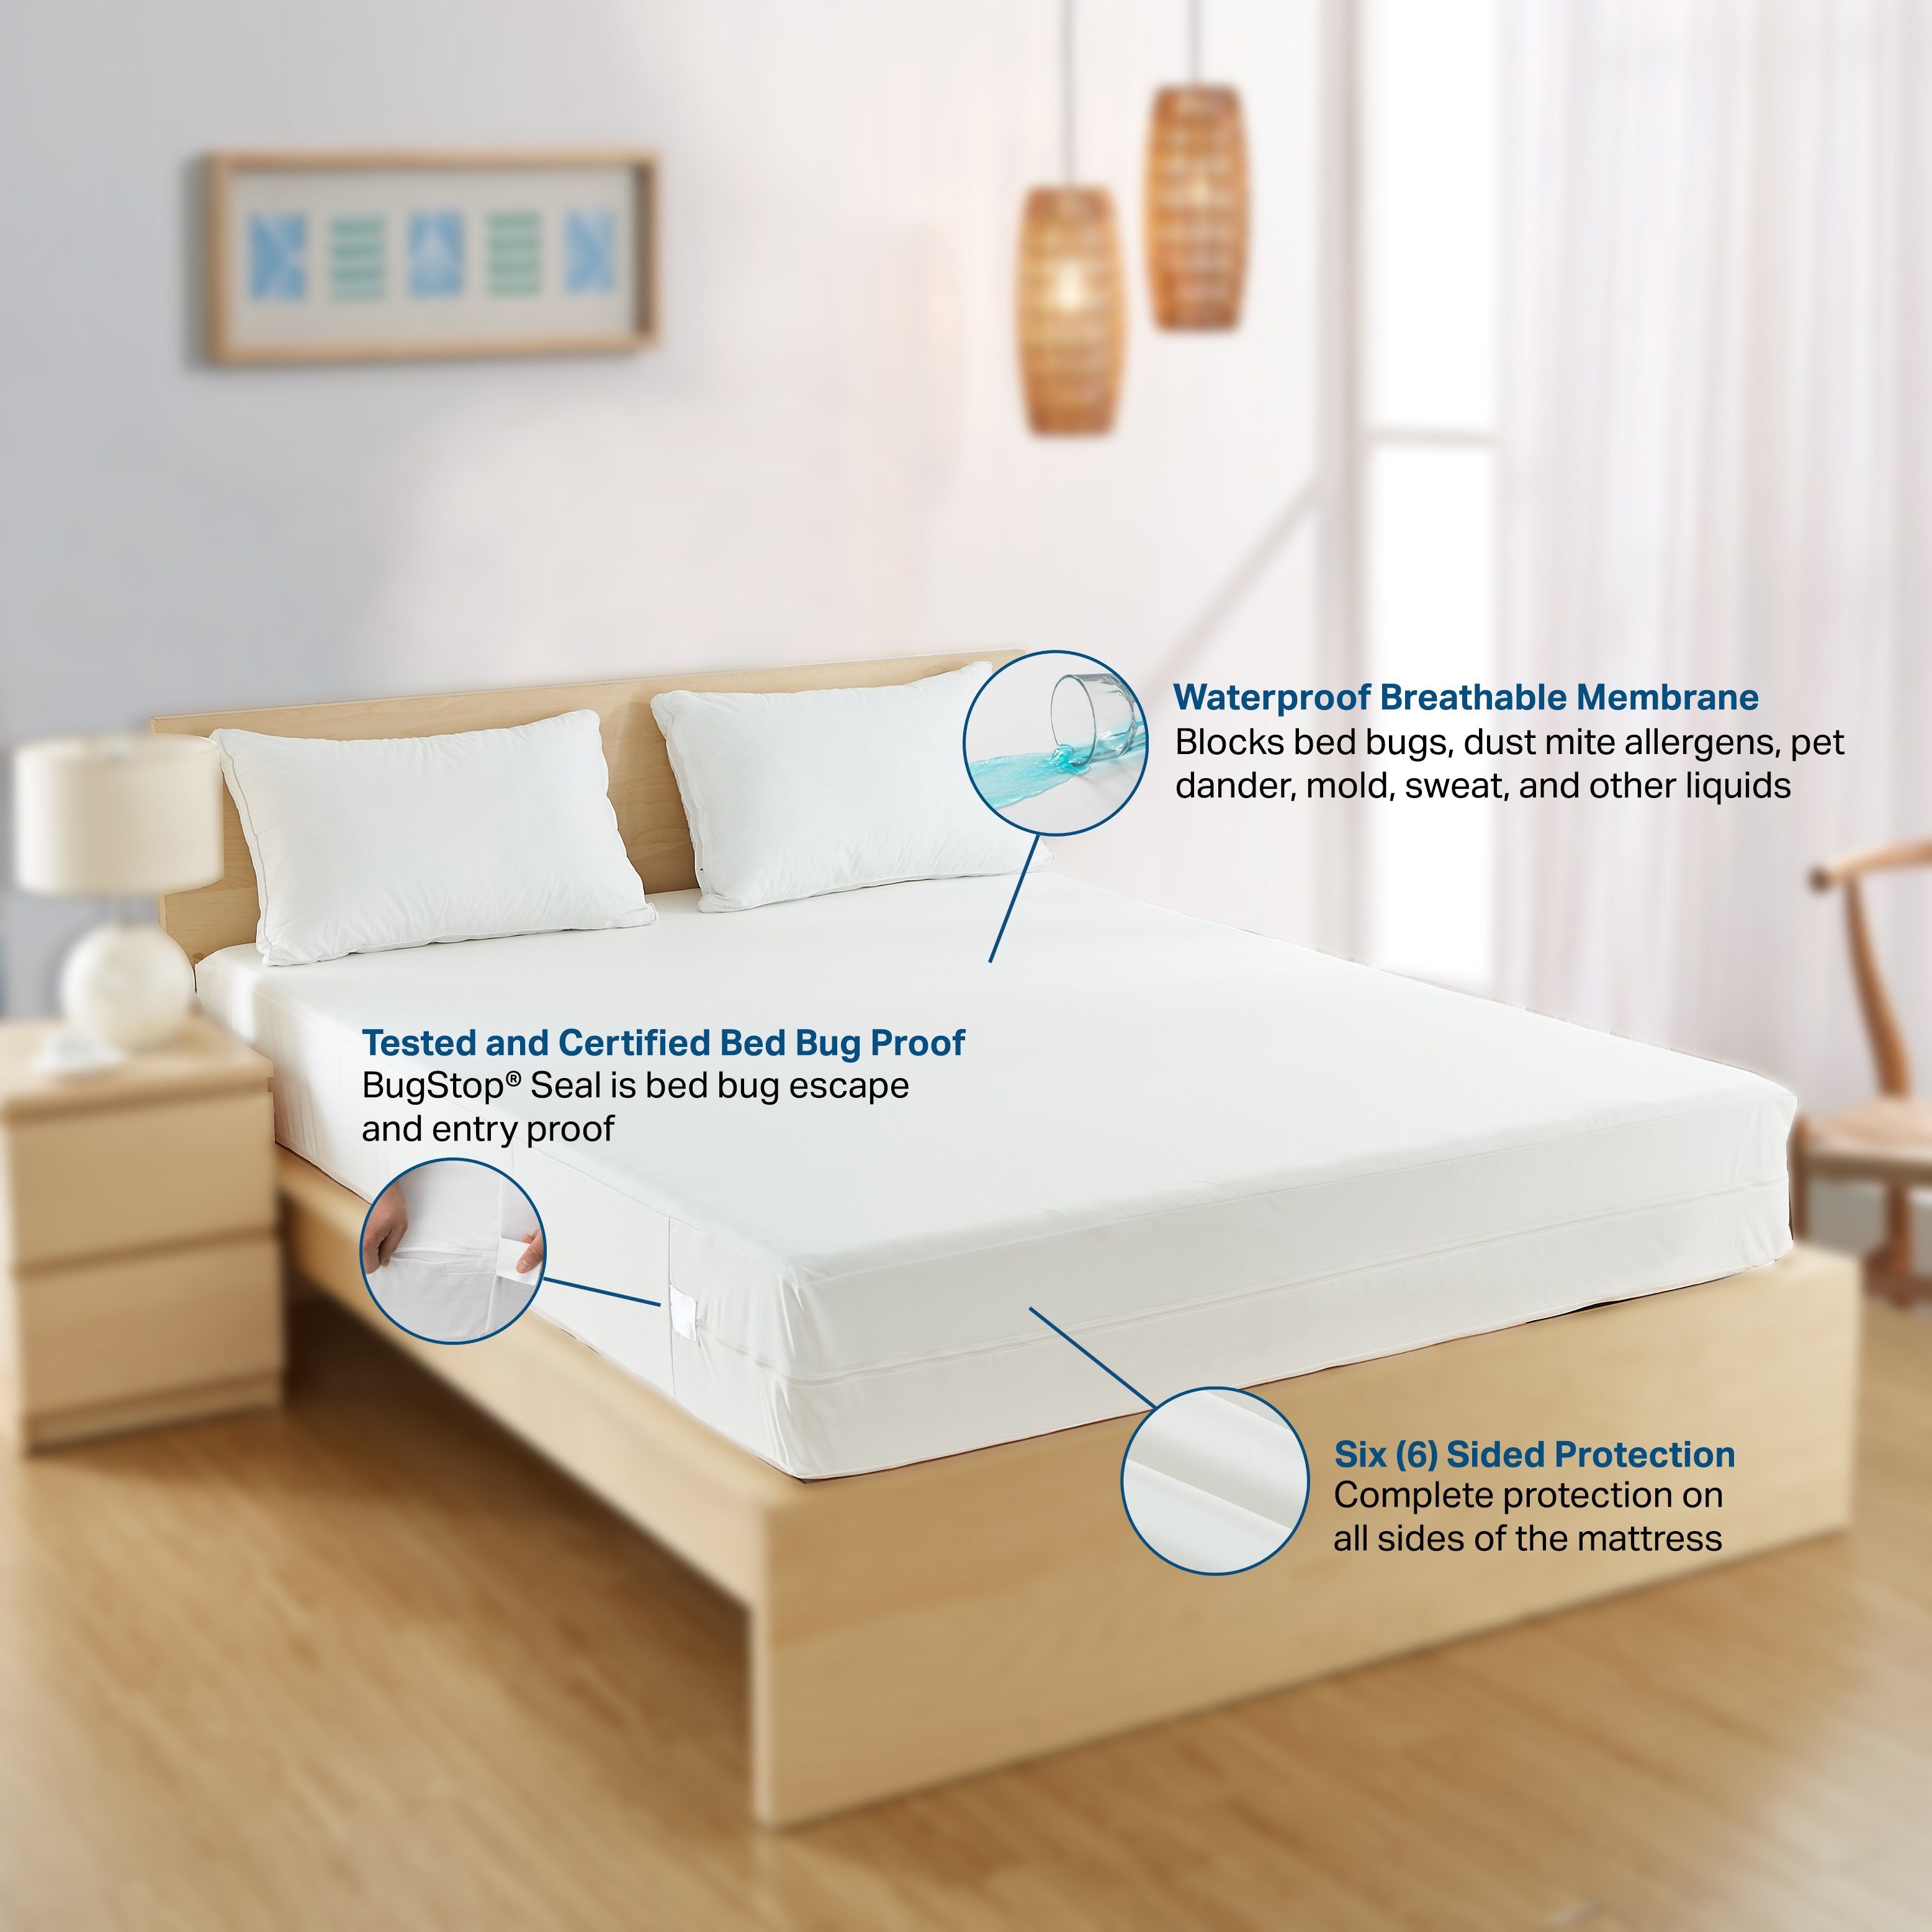 BedBug Solution™ Hybrid Zippered Mattress Encasing Zippered Mattress Protector / Cover Features Waterproof Breathable Fabric and the Patented BugStop Seal